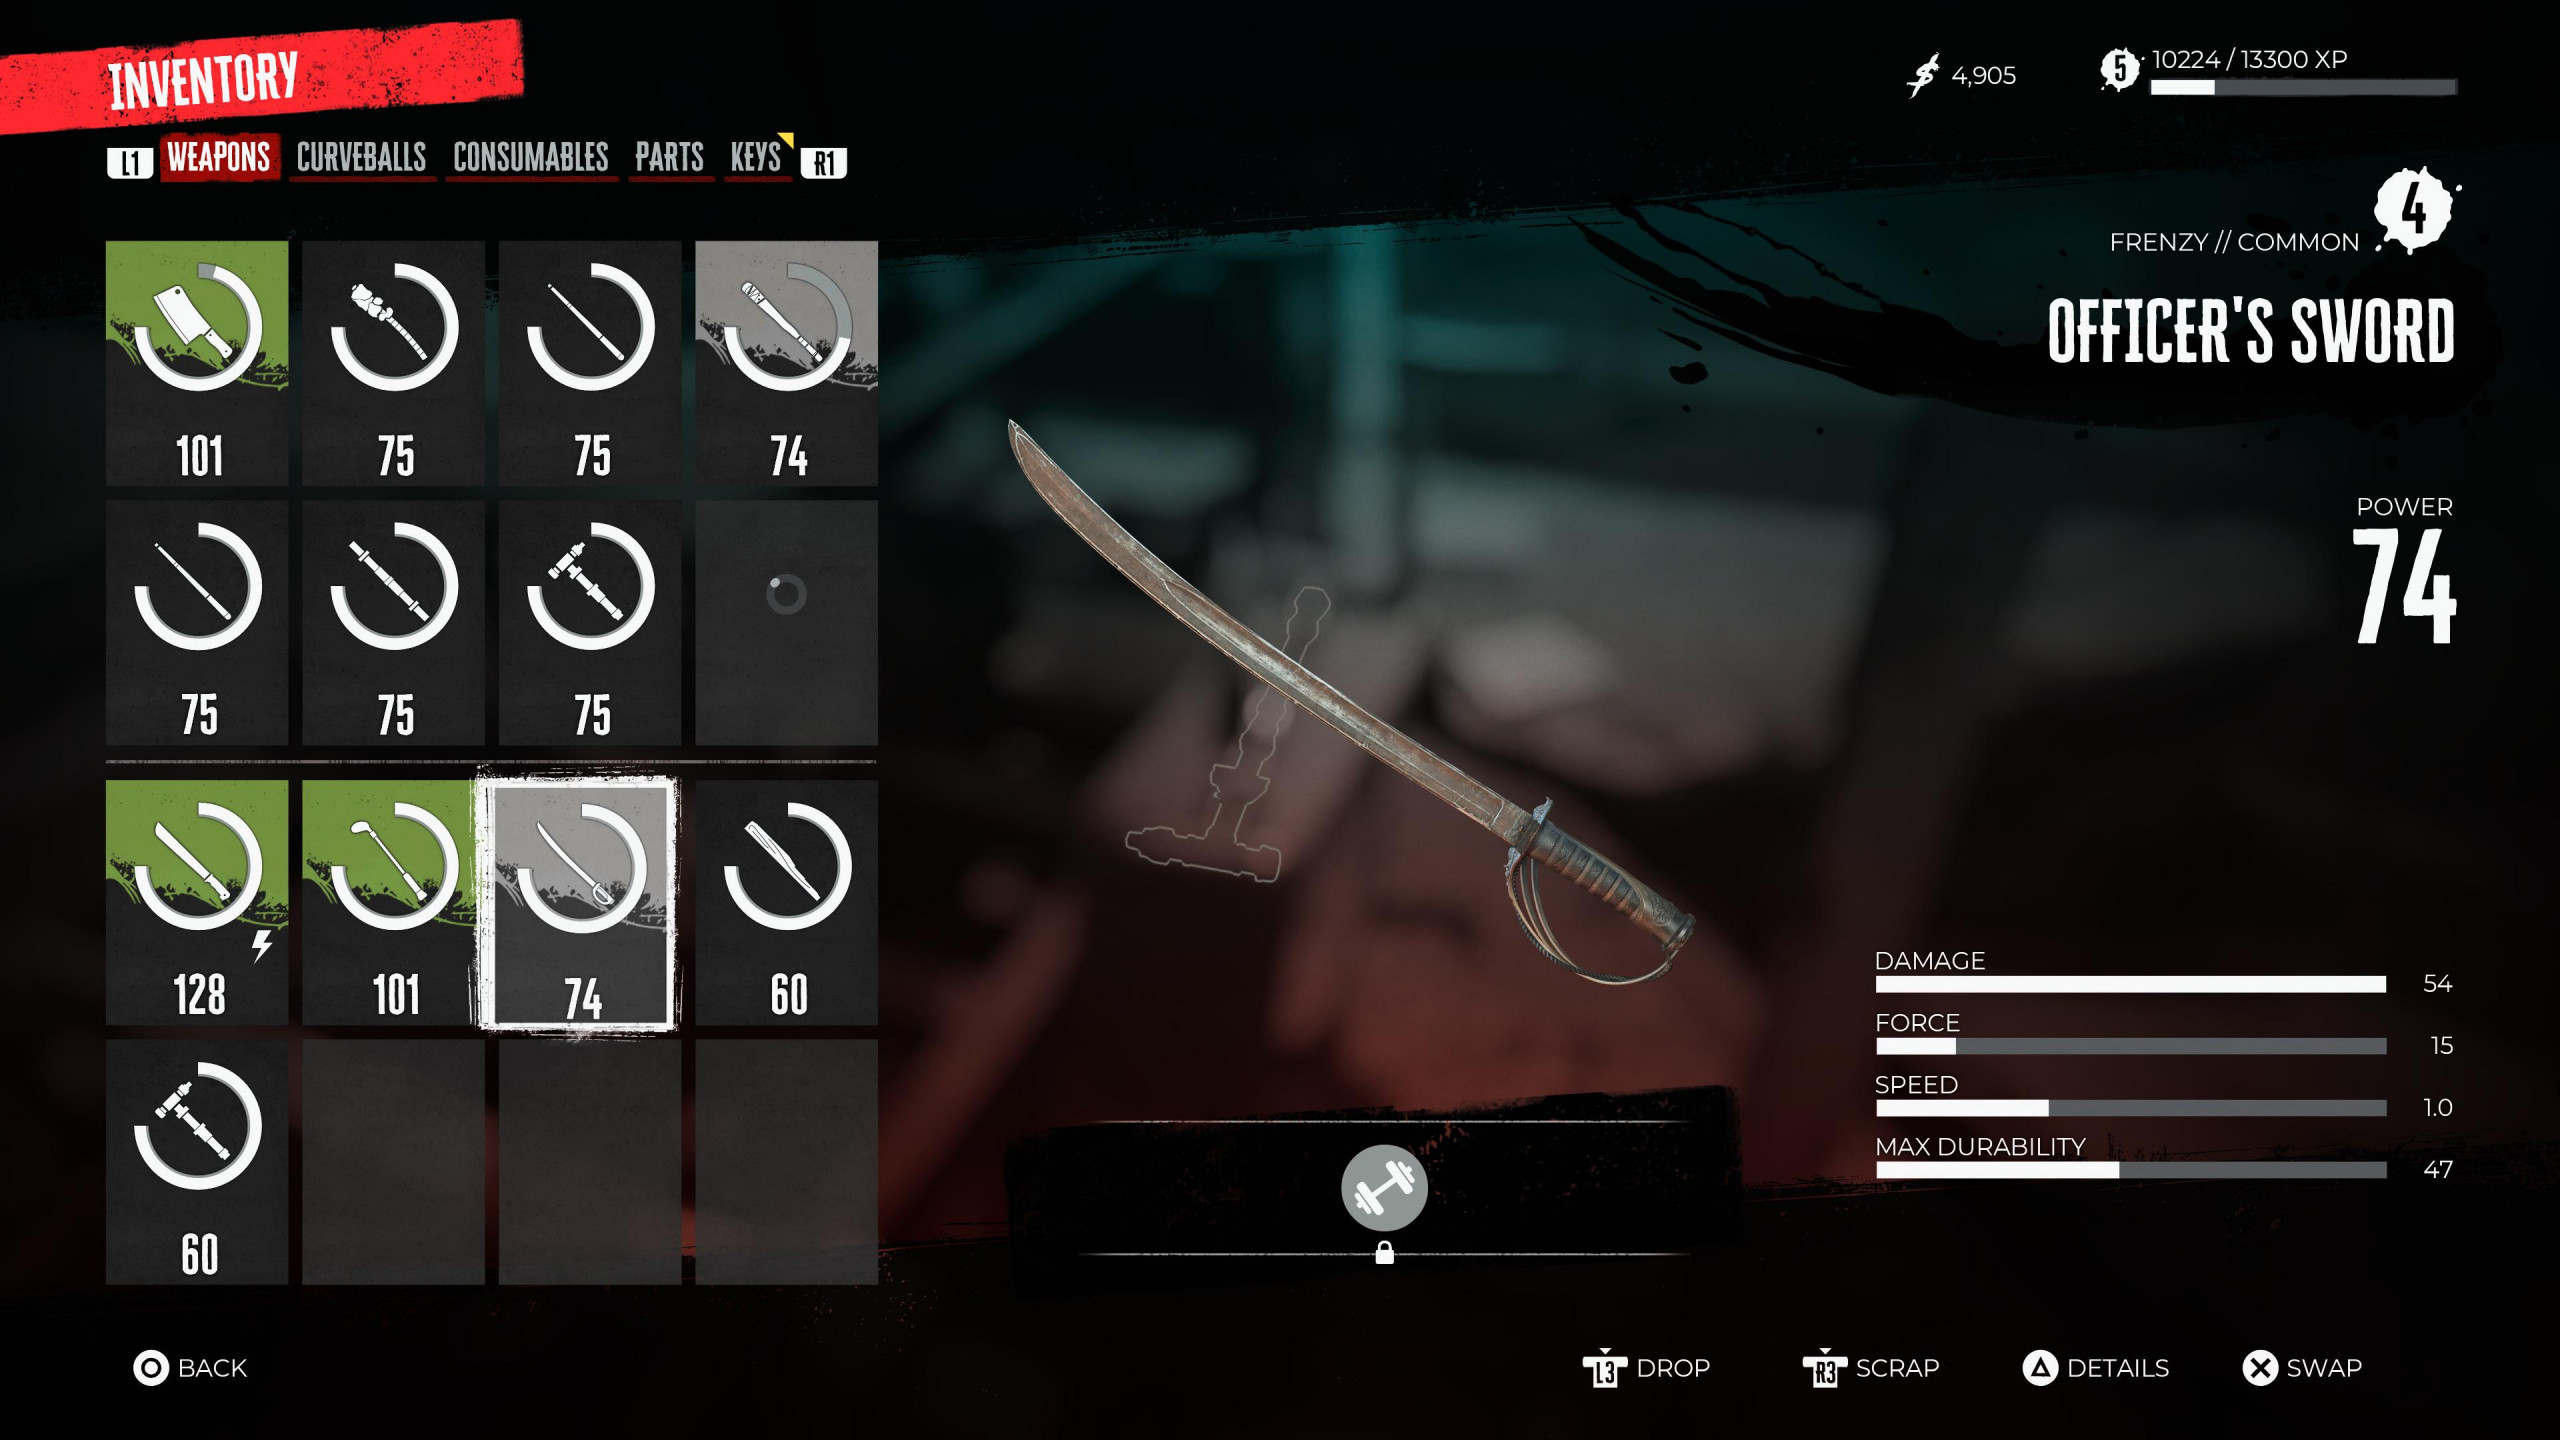 your inventory shows weapons and their strengths as well as being able to scrap them or even just drop them.